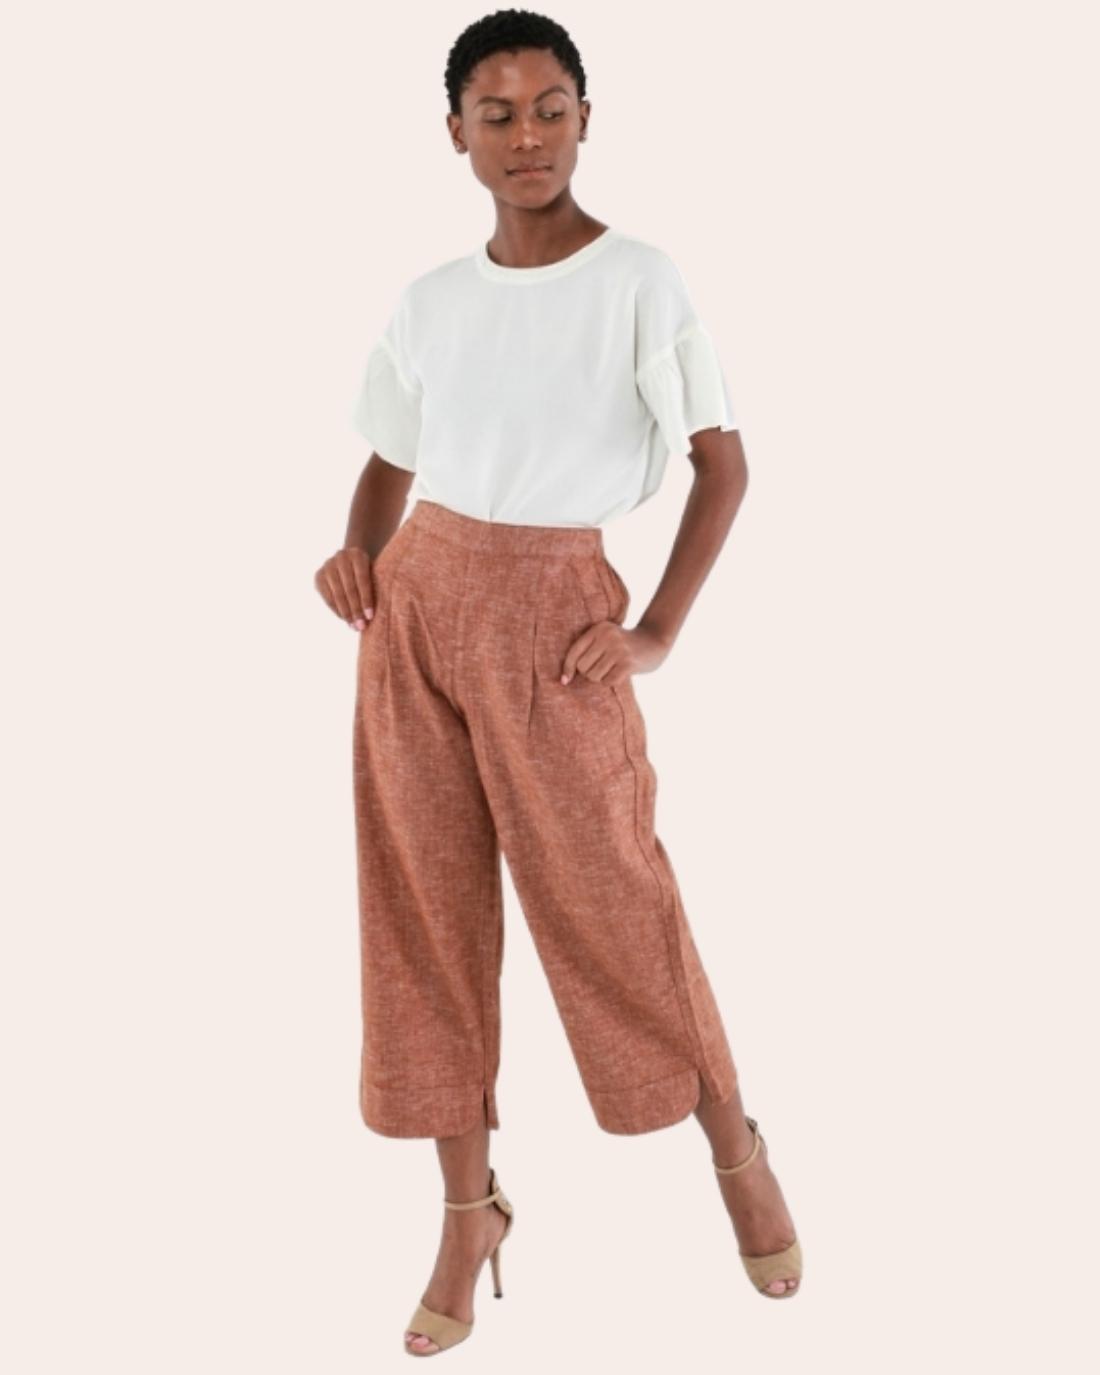 Ladies Linen/Cotton Pants Glazed Ginger - Giordano South Africa